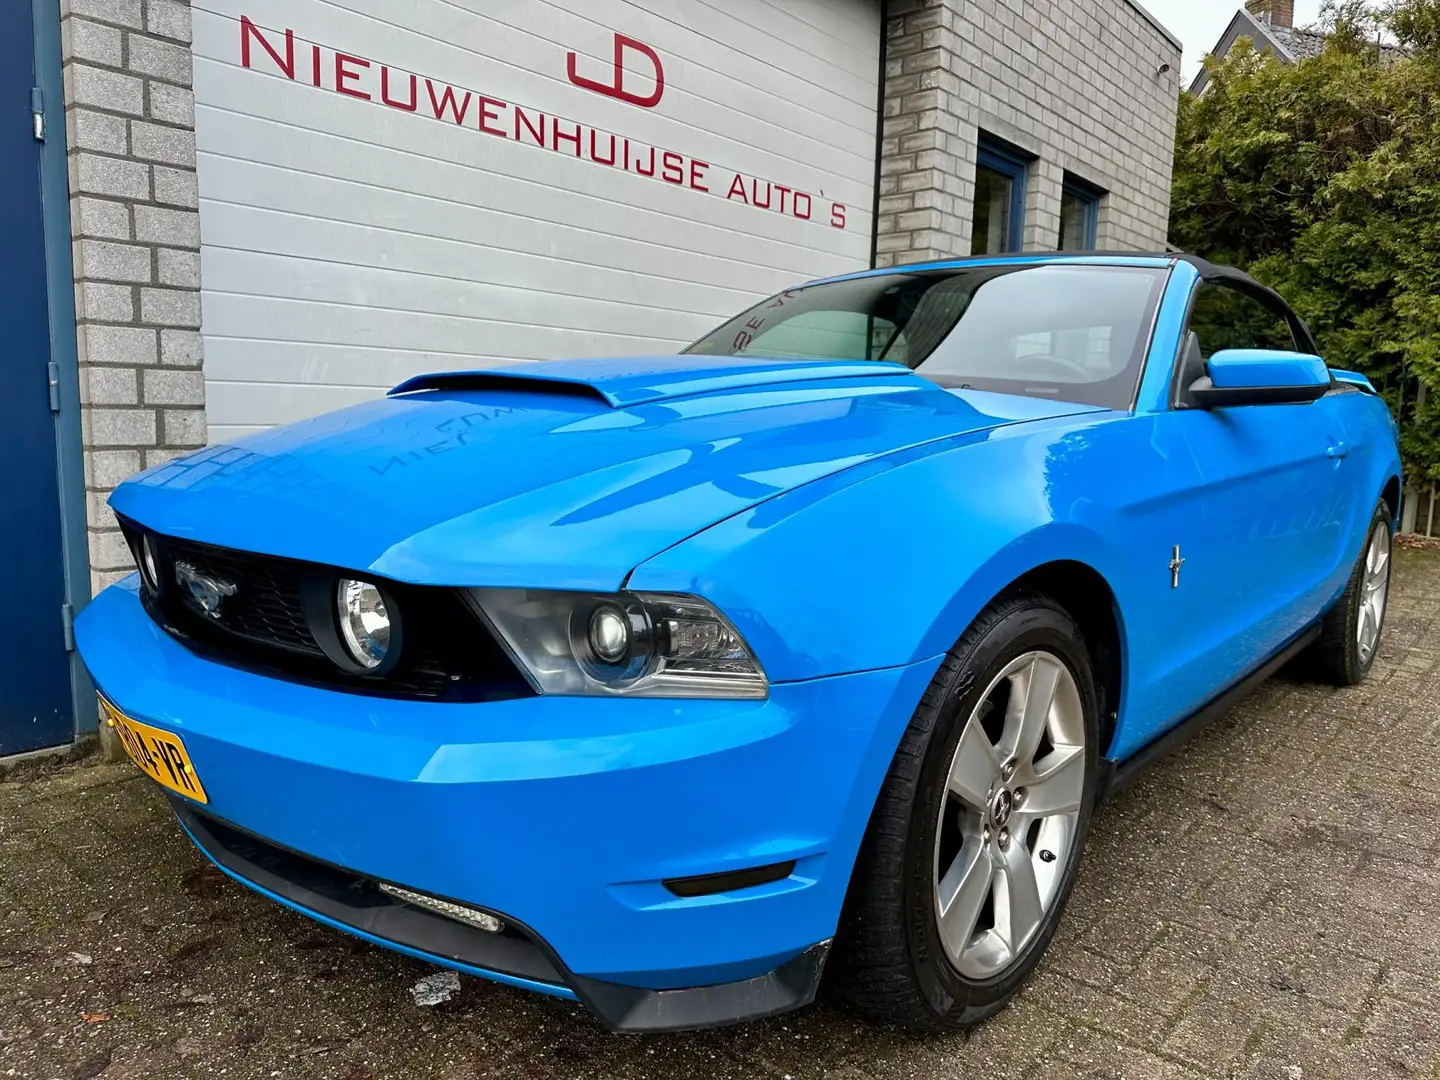 Ford Mustang 4.6 V8 automaat, nieuw model 2010!, youngtimer!! Azul - 1